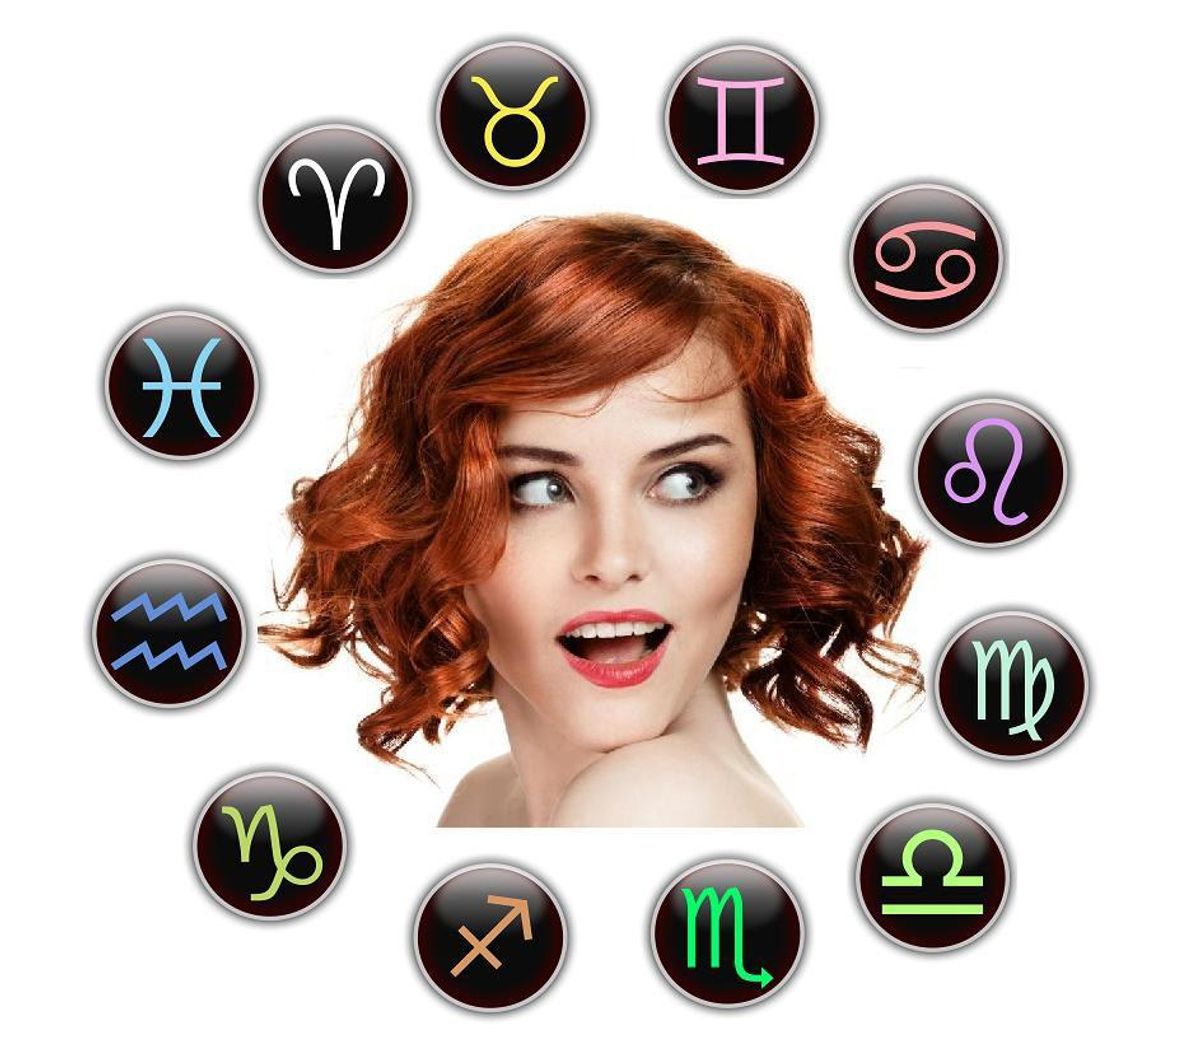 Hairstyles For Your Star Sign